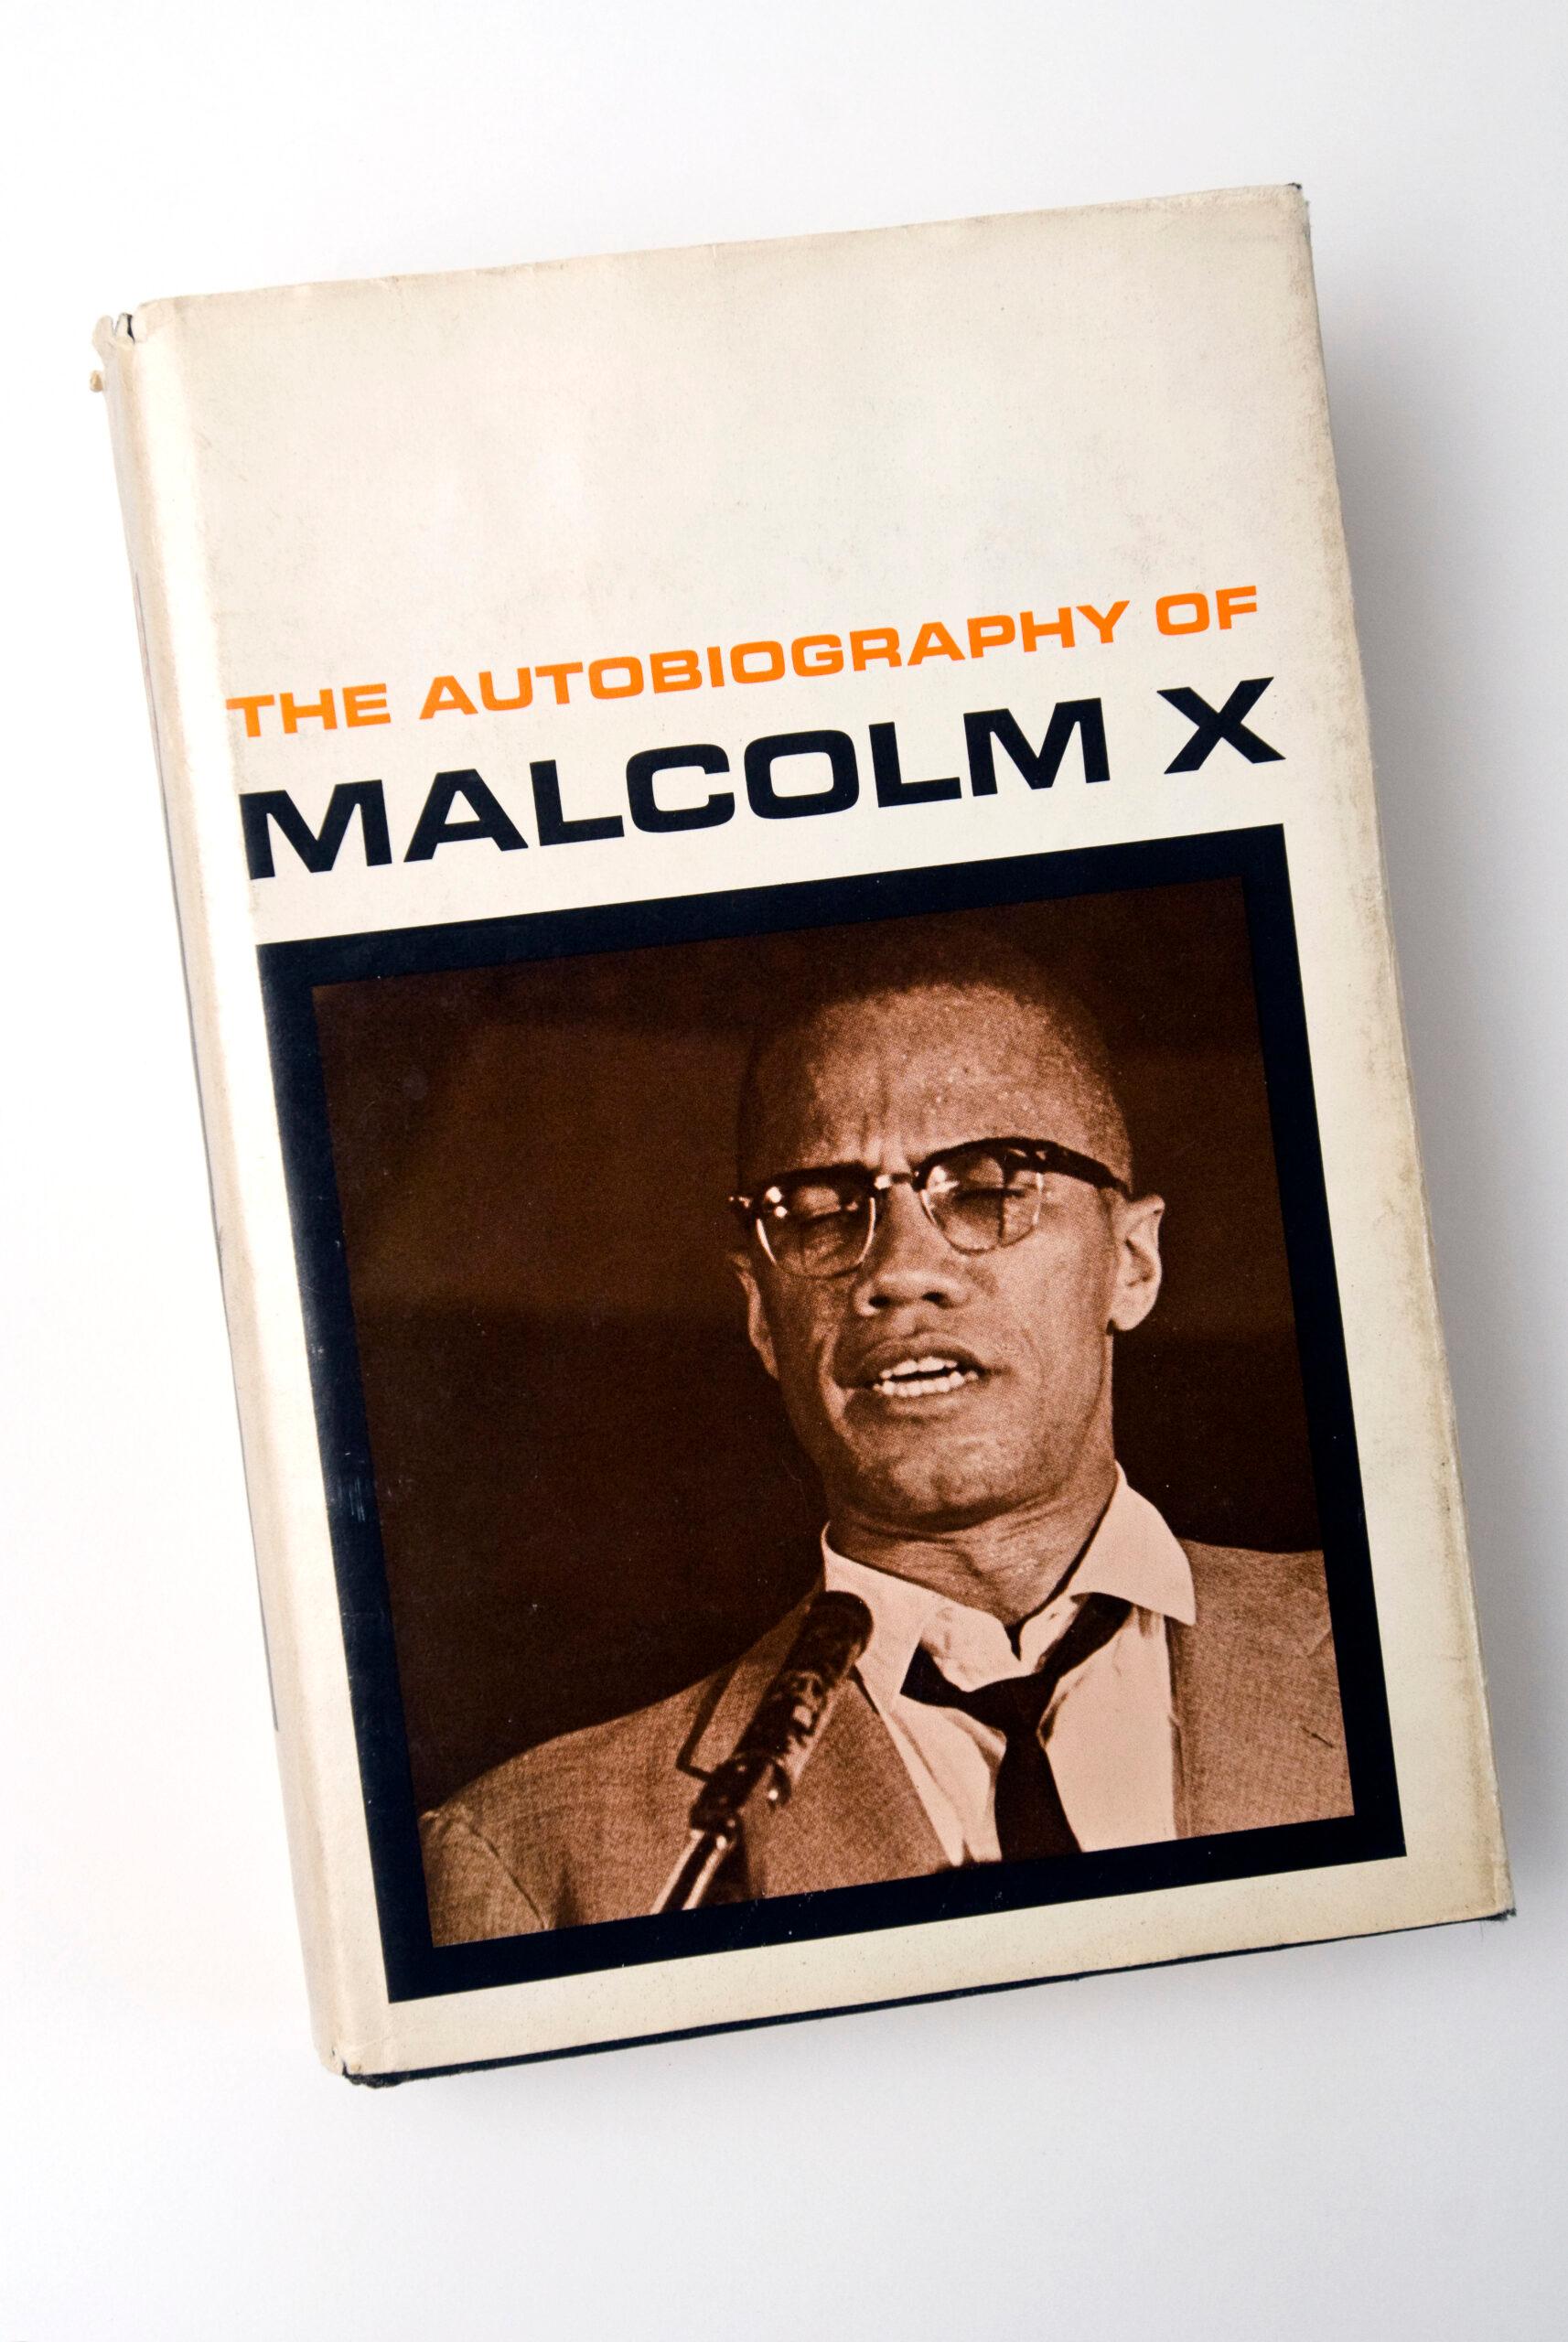 A copy of the Autobiography of Malcolm X